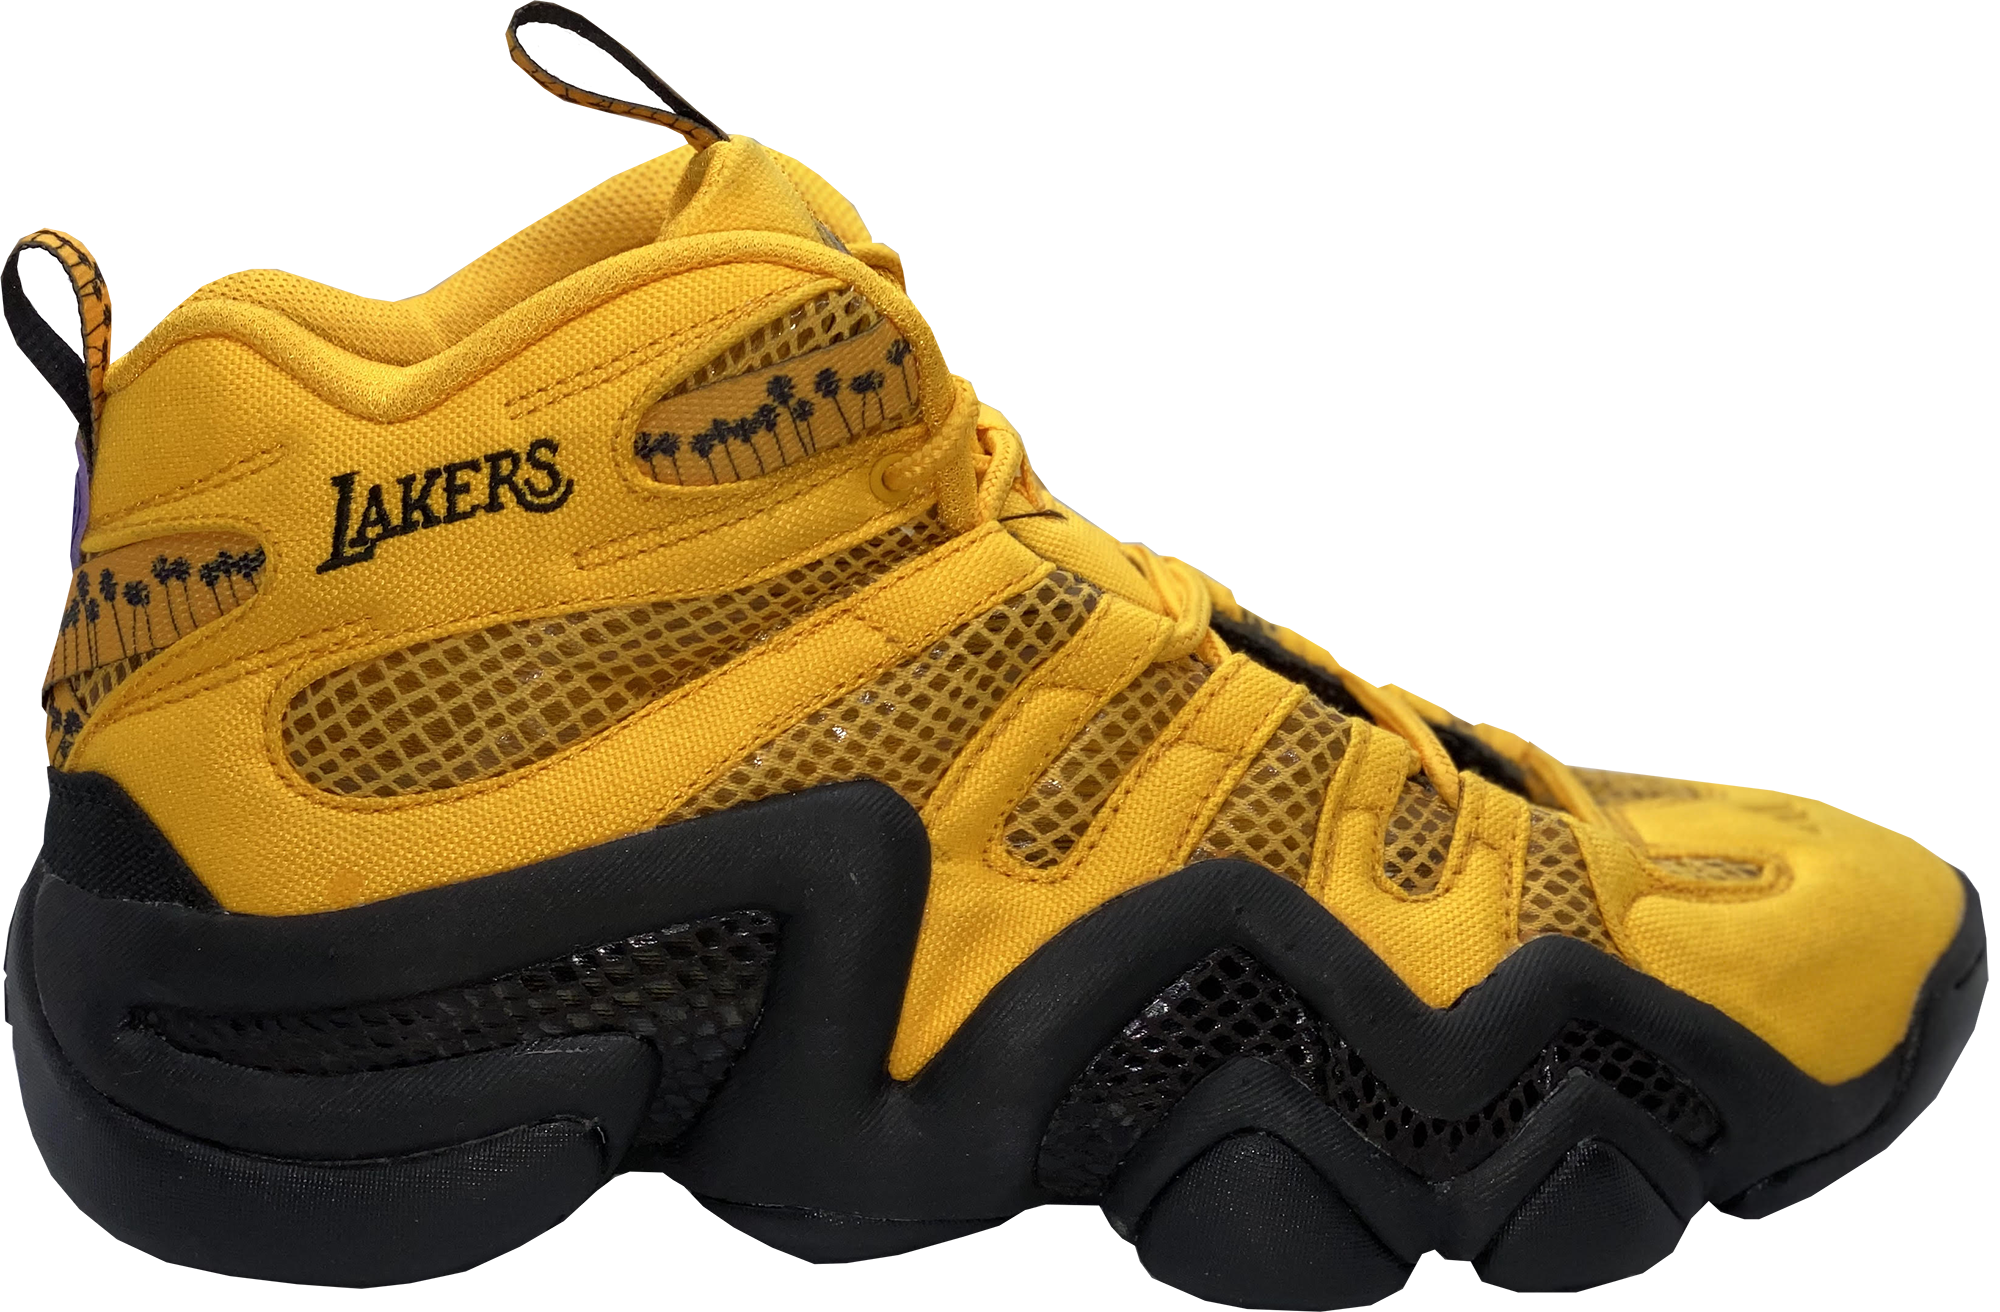 adidas crazy 8 lakers